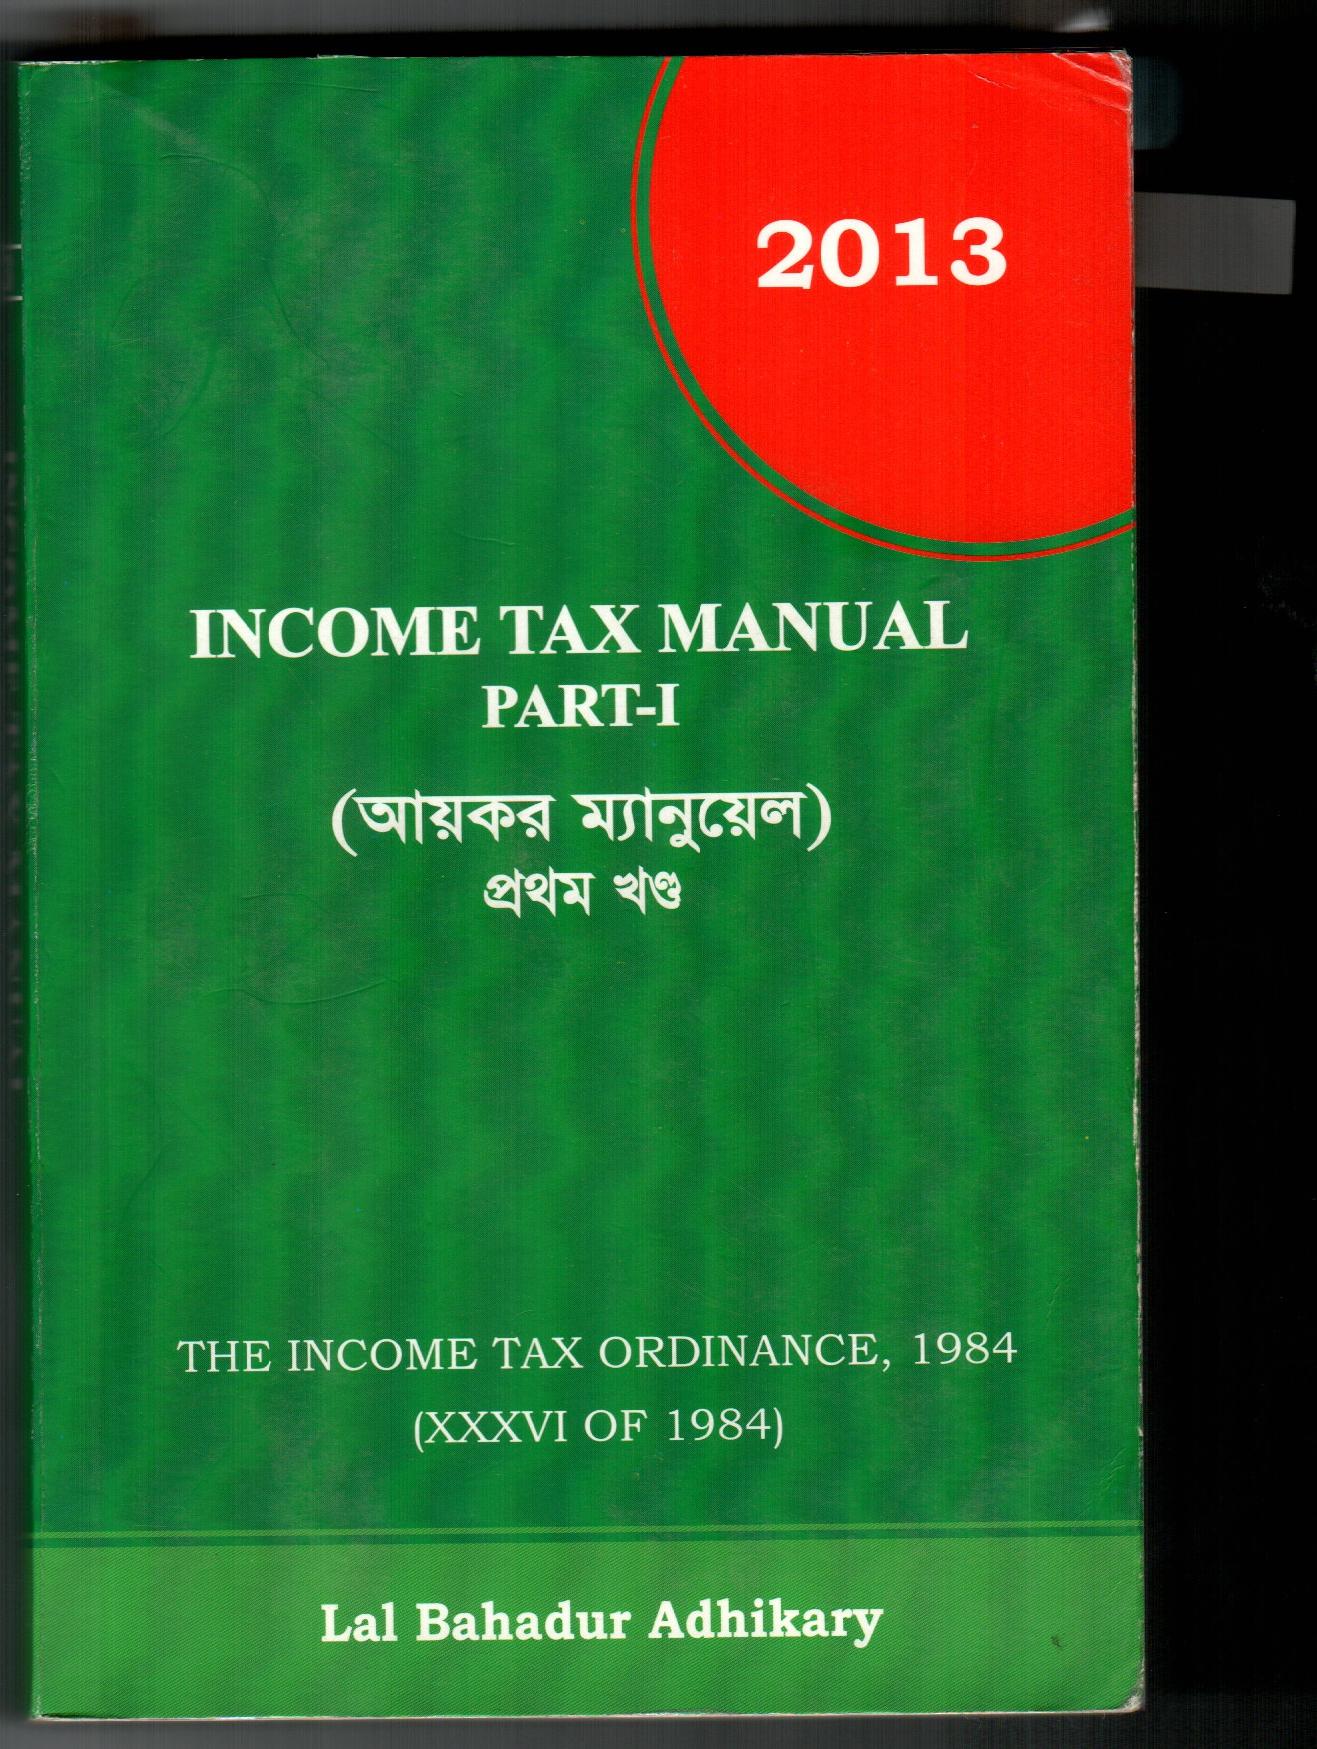 Income tax manual part-1